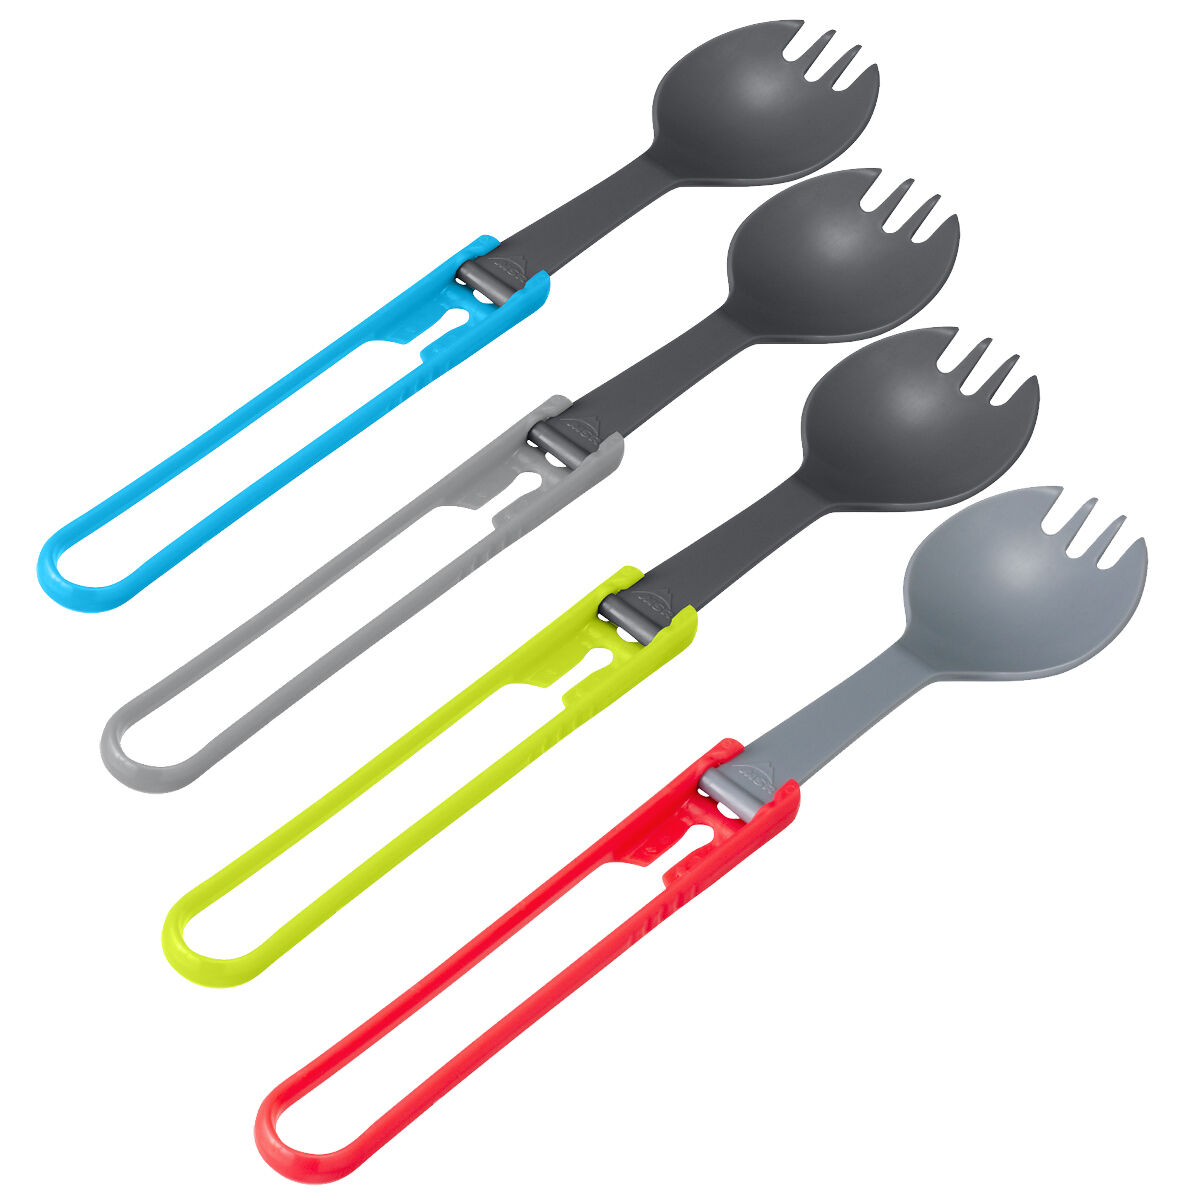 XPT 3 in 1 Barbecue Tongs,Multifunctional Stainless Steel Camping BBQ Spoon Tong Spatula Utensil for Camping Outdoor Travel Silver